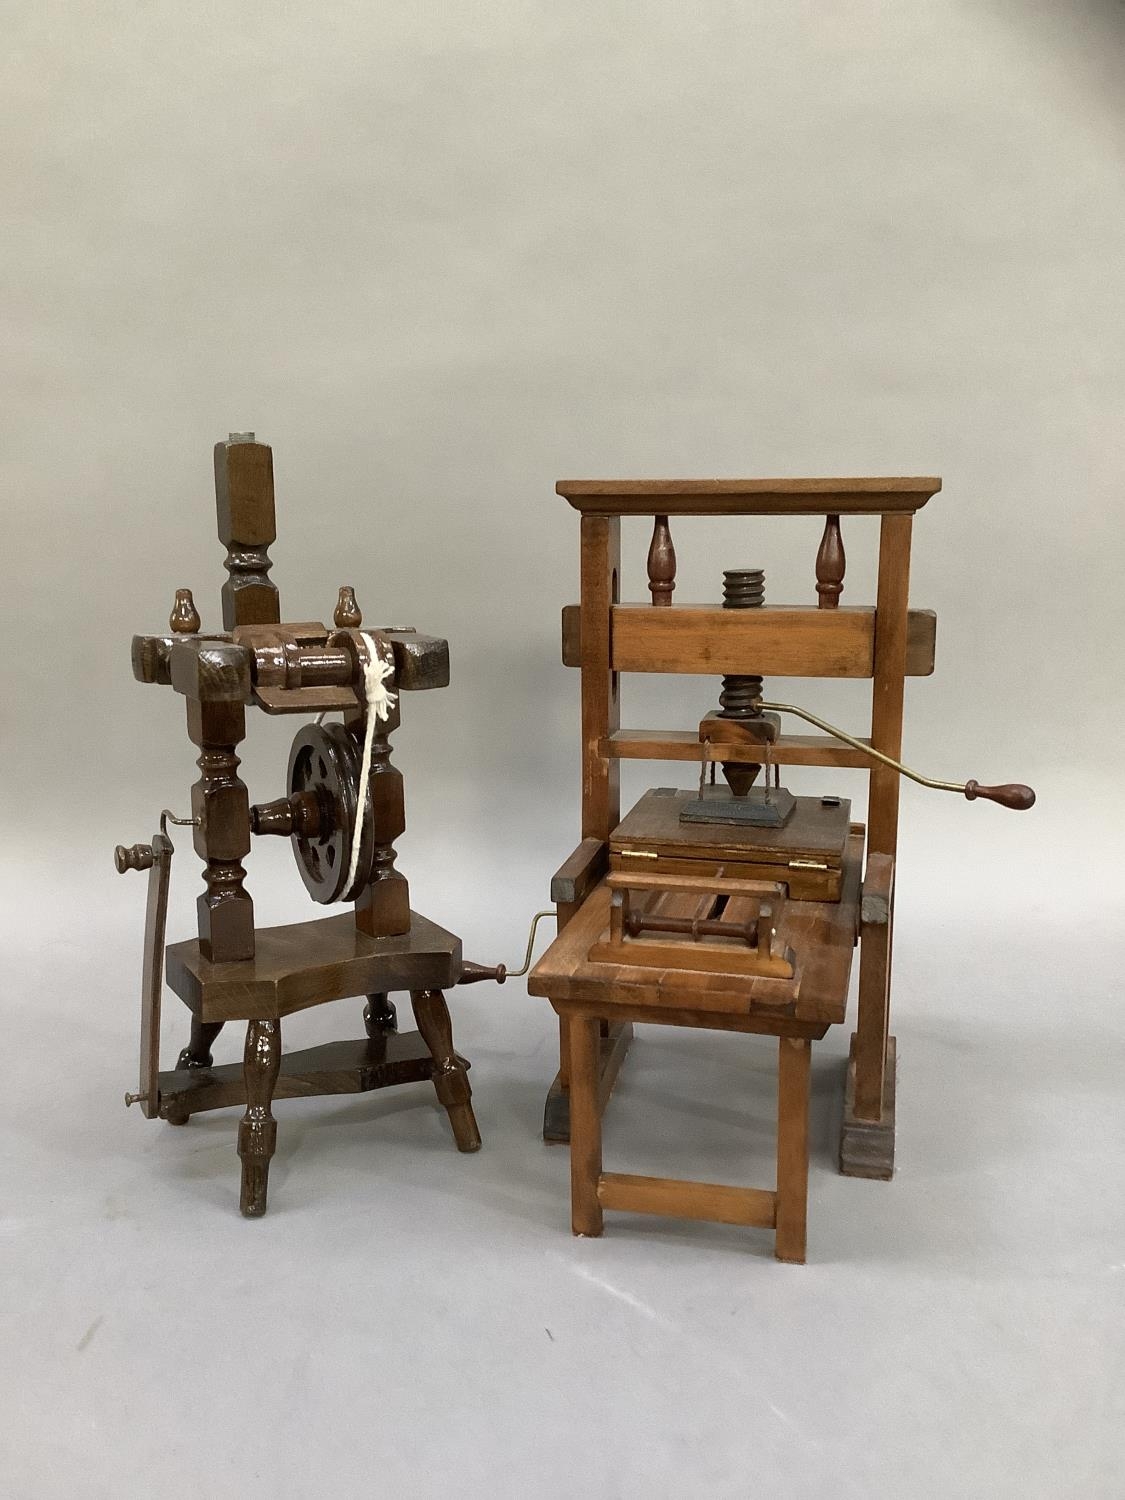 A model printing press and a spinning wheel